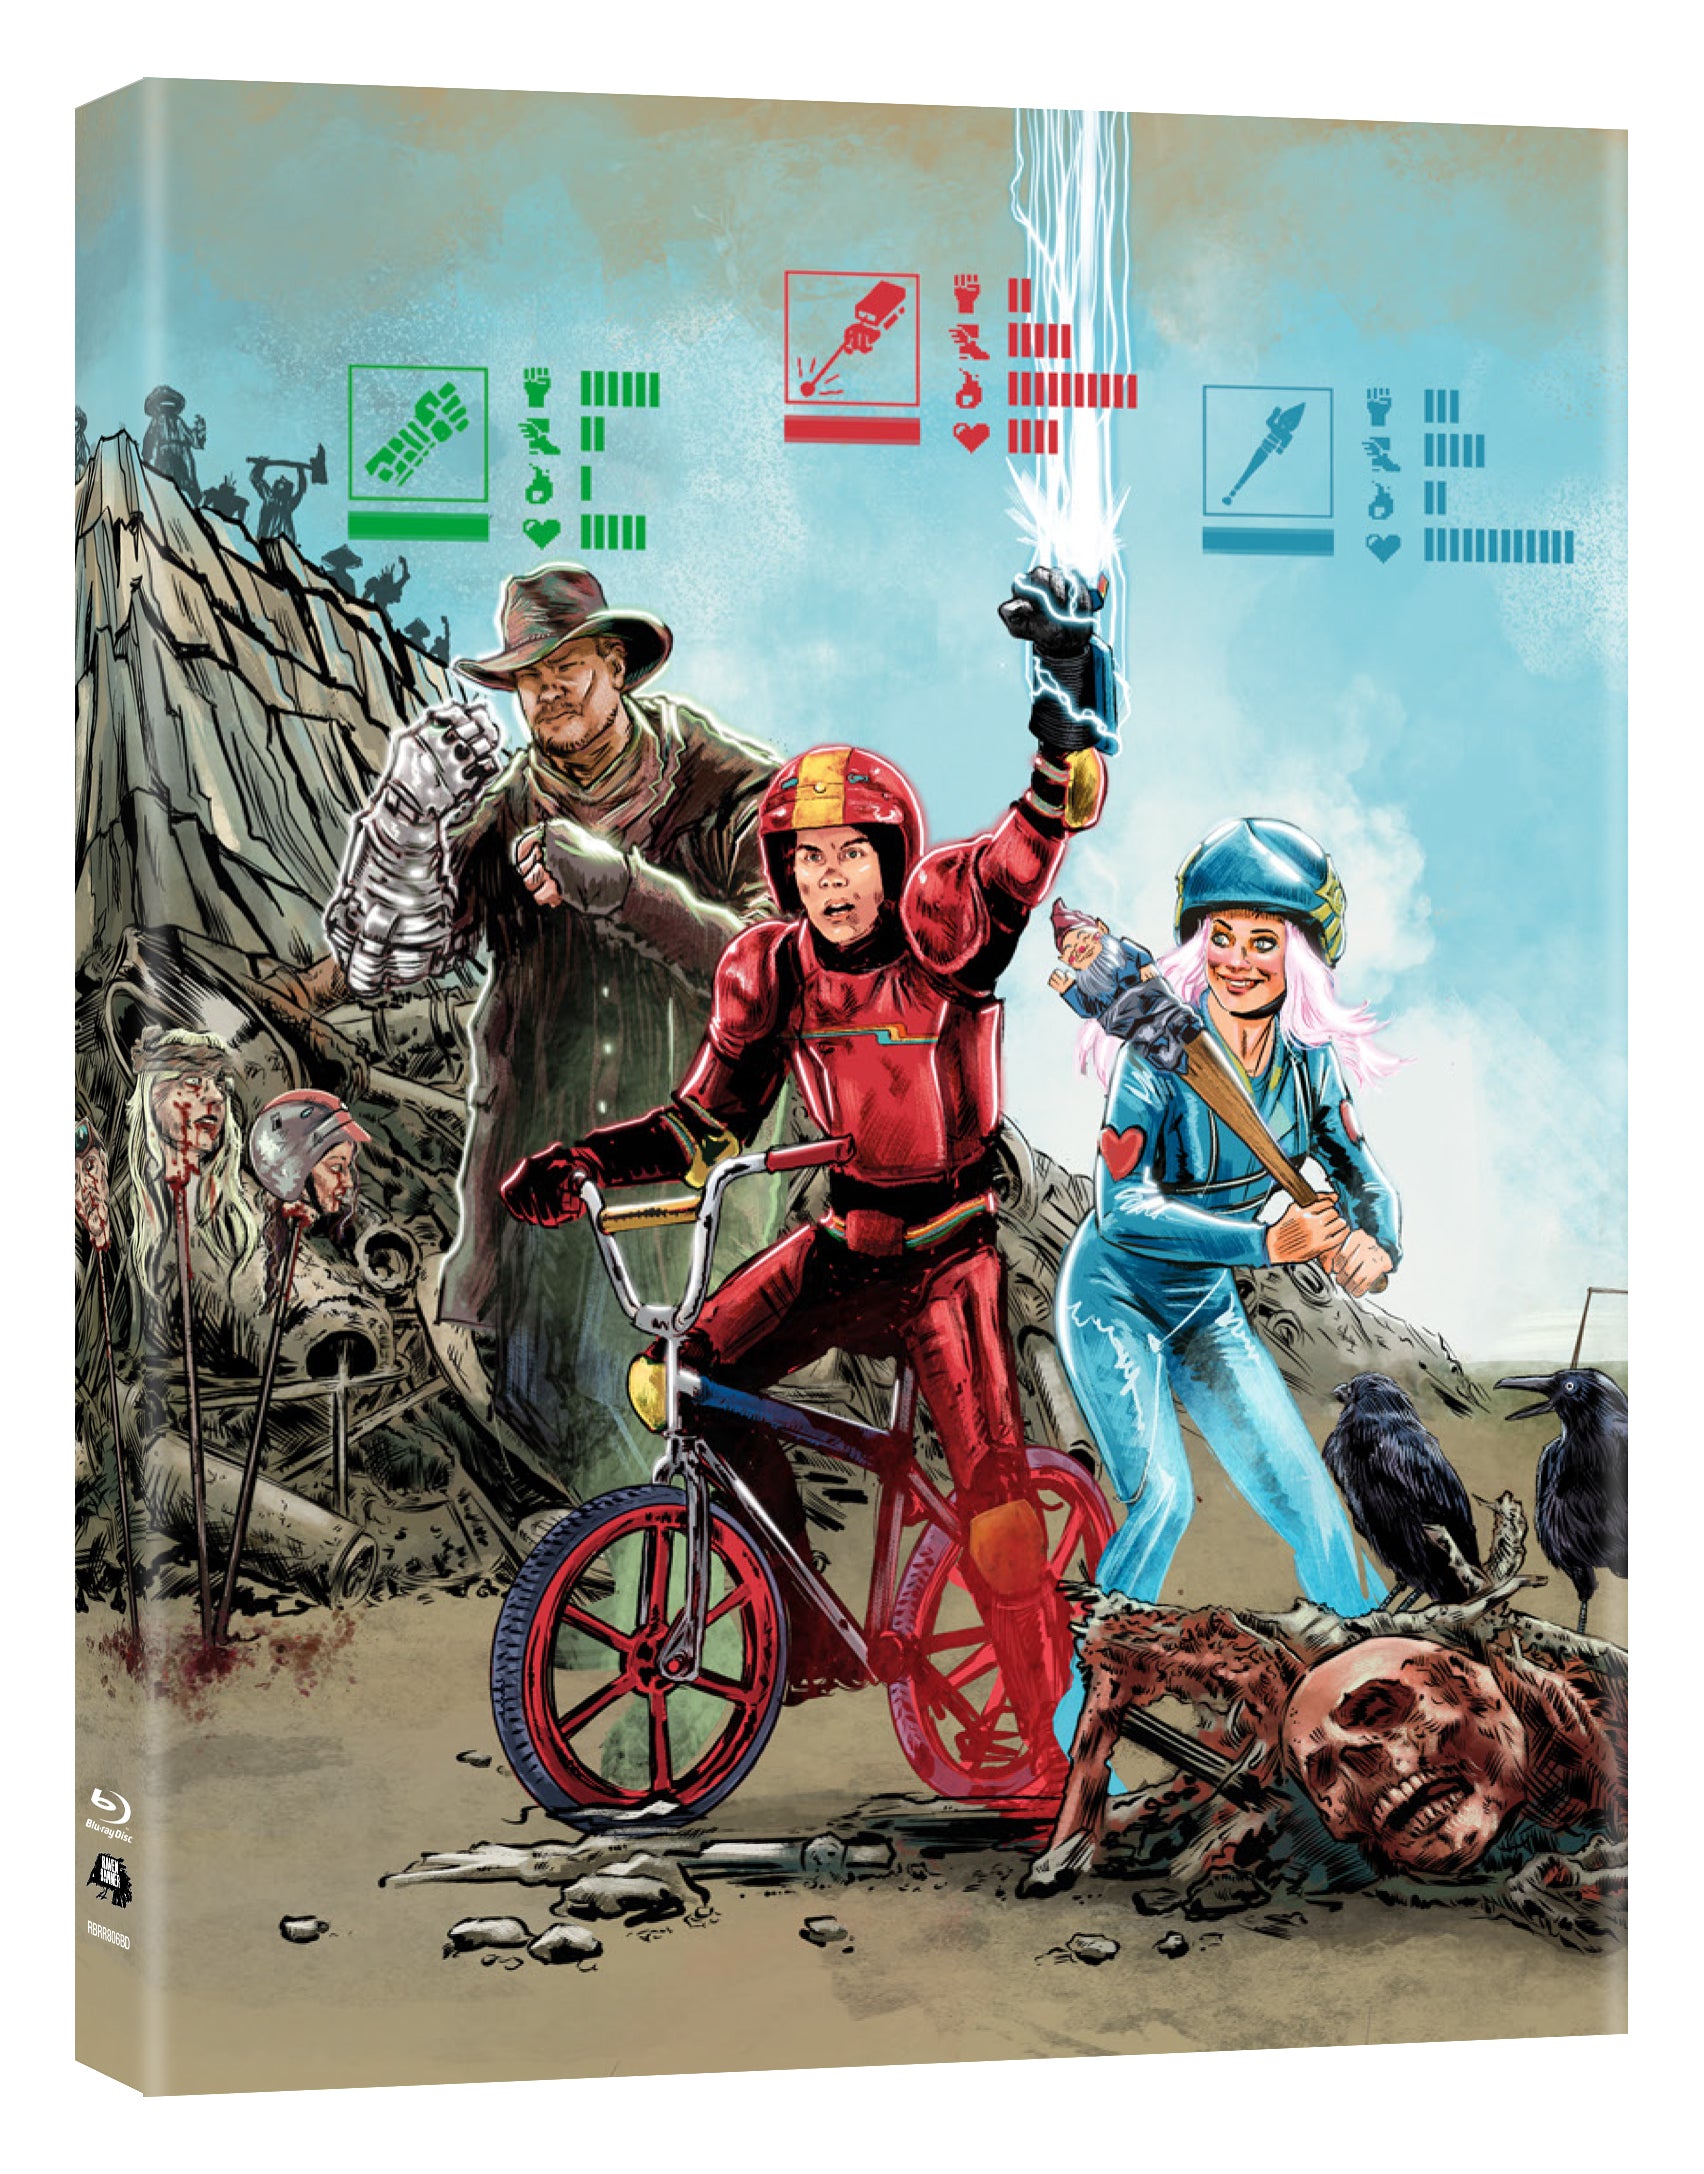 TURBO KID - BLU-RAY SPECIAL LIMITED EDITION w/ TRADING CARDS